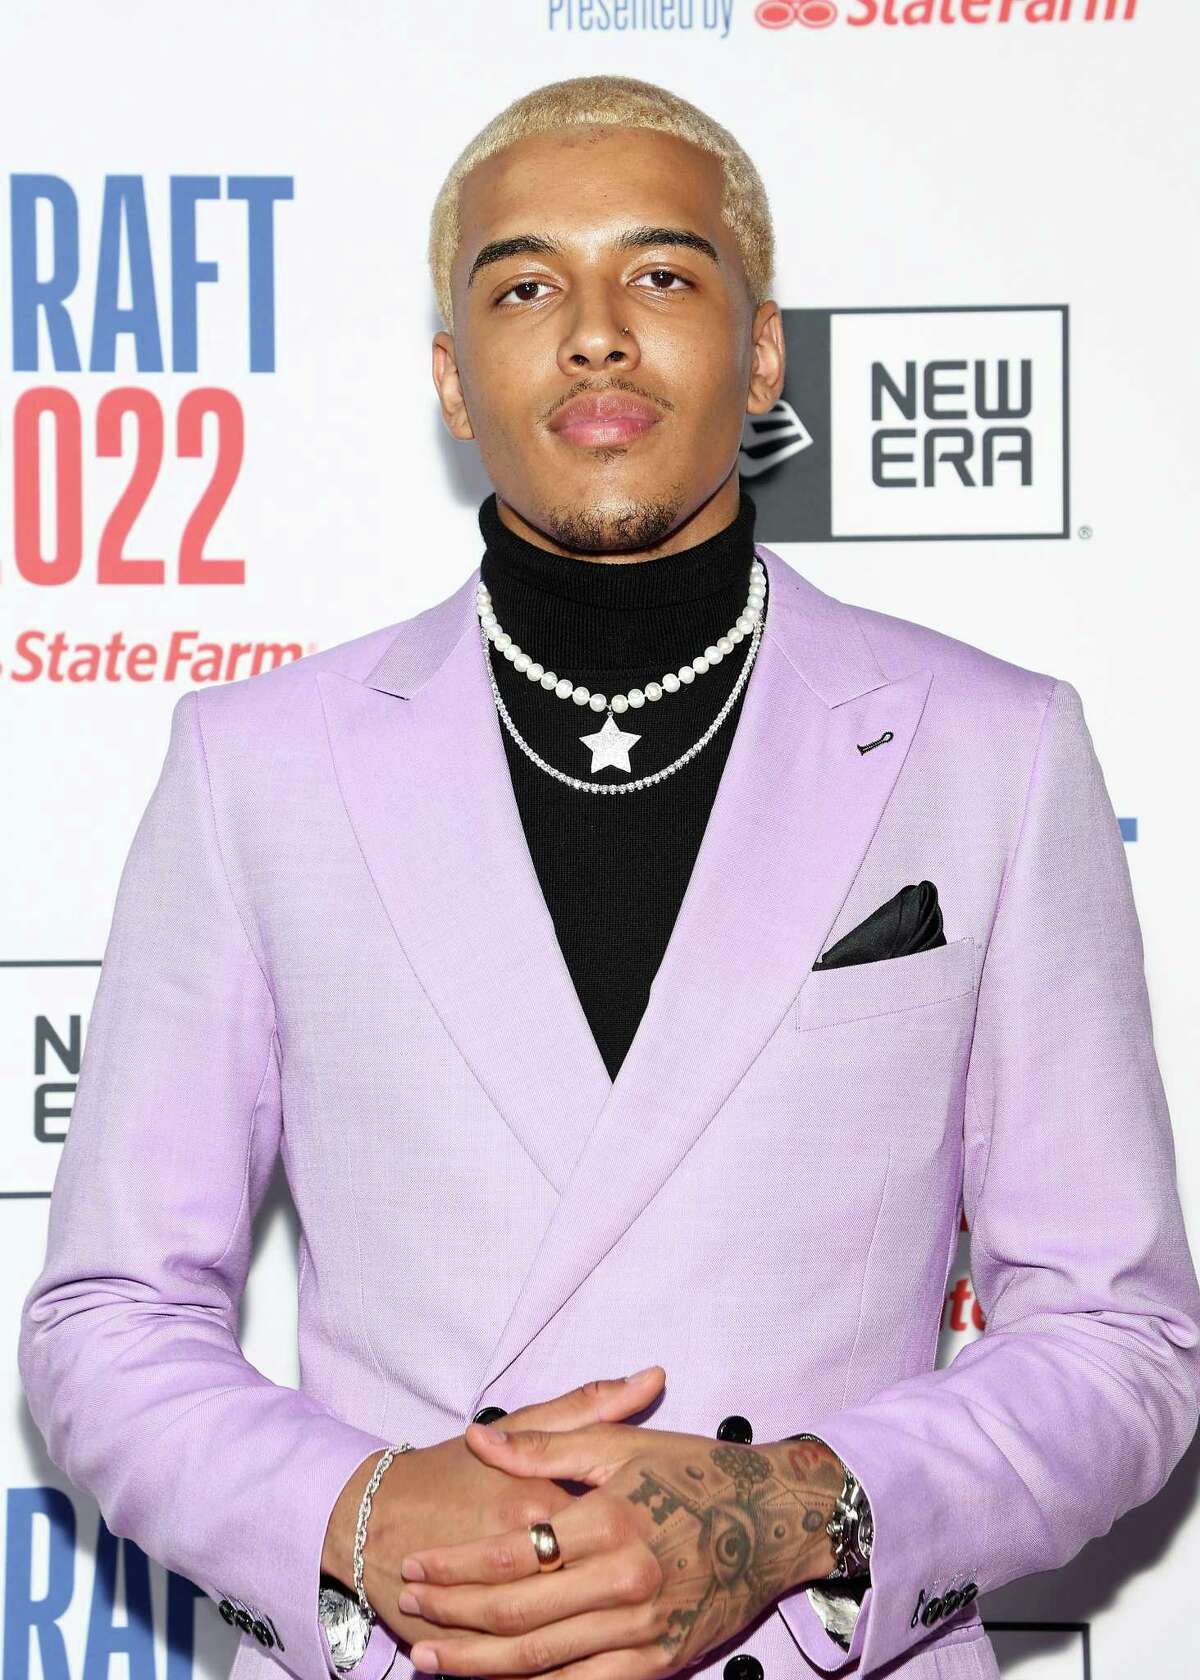 Jeremy Sochan poses for photos on the red carpet during the 2022 NBA Draft at Barclays Center on June 23, 2022 in New York City.